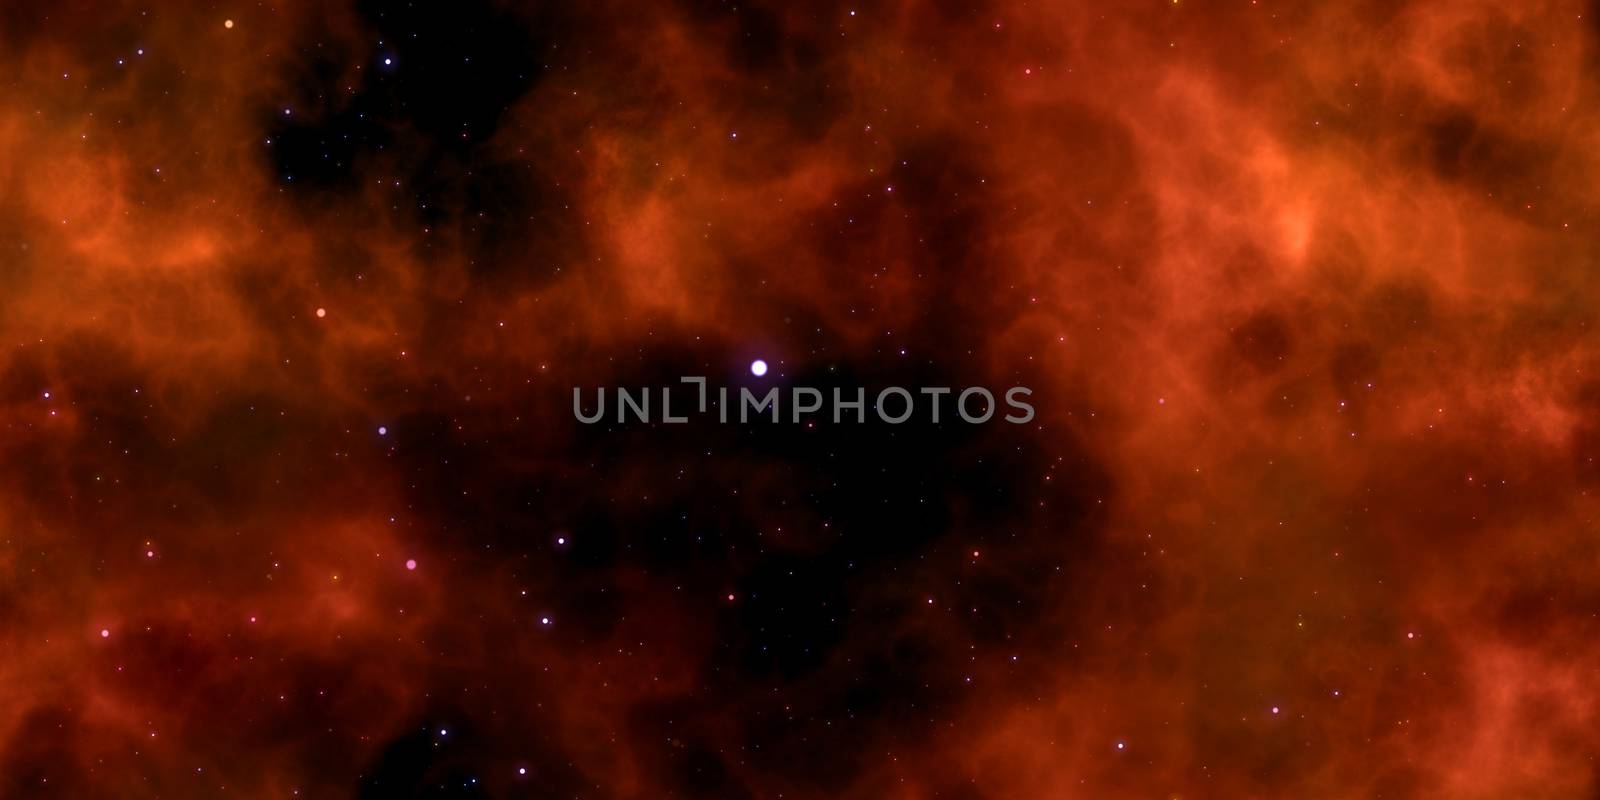 Dark Starry Clouds on Night Sky Galaxy Background. Abstract Cosmos Infinity Texture. 3D Rendering. 3D Illustration. by sanches812